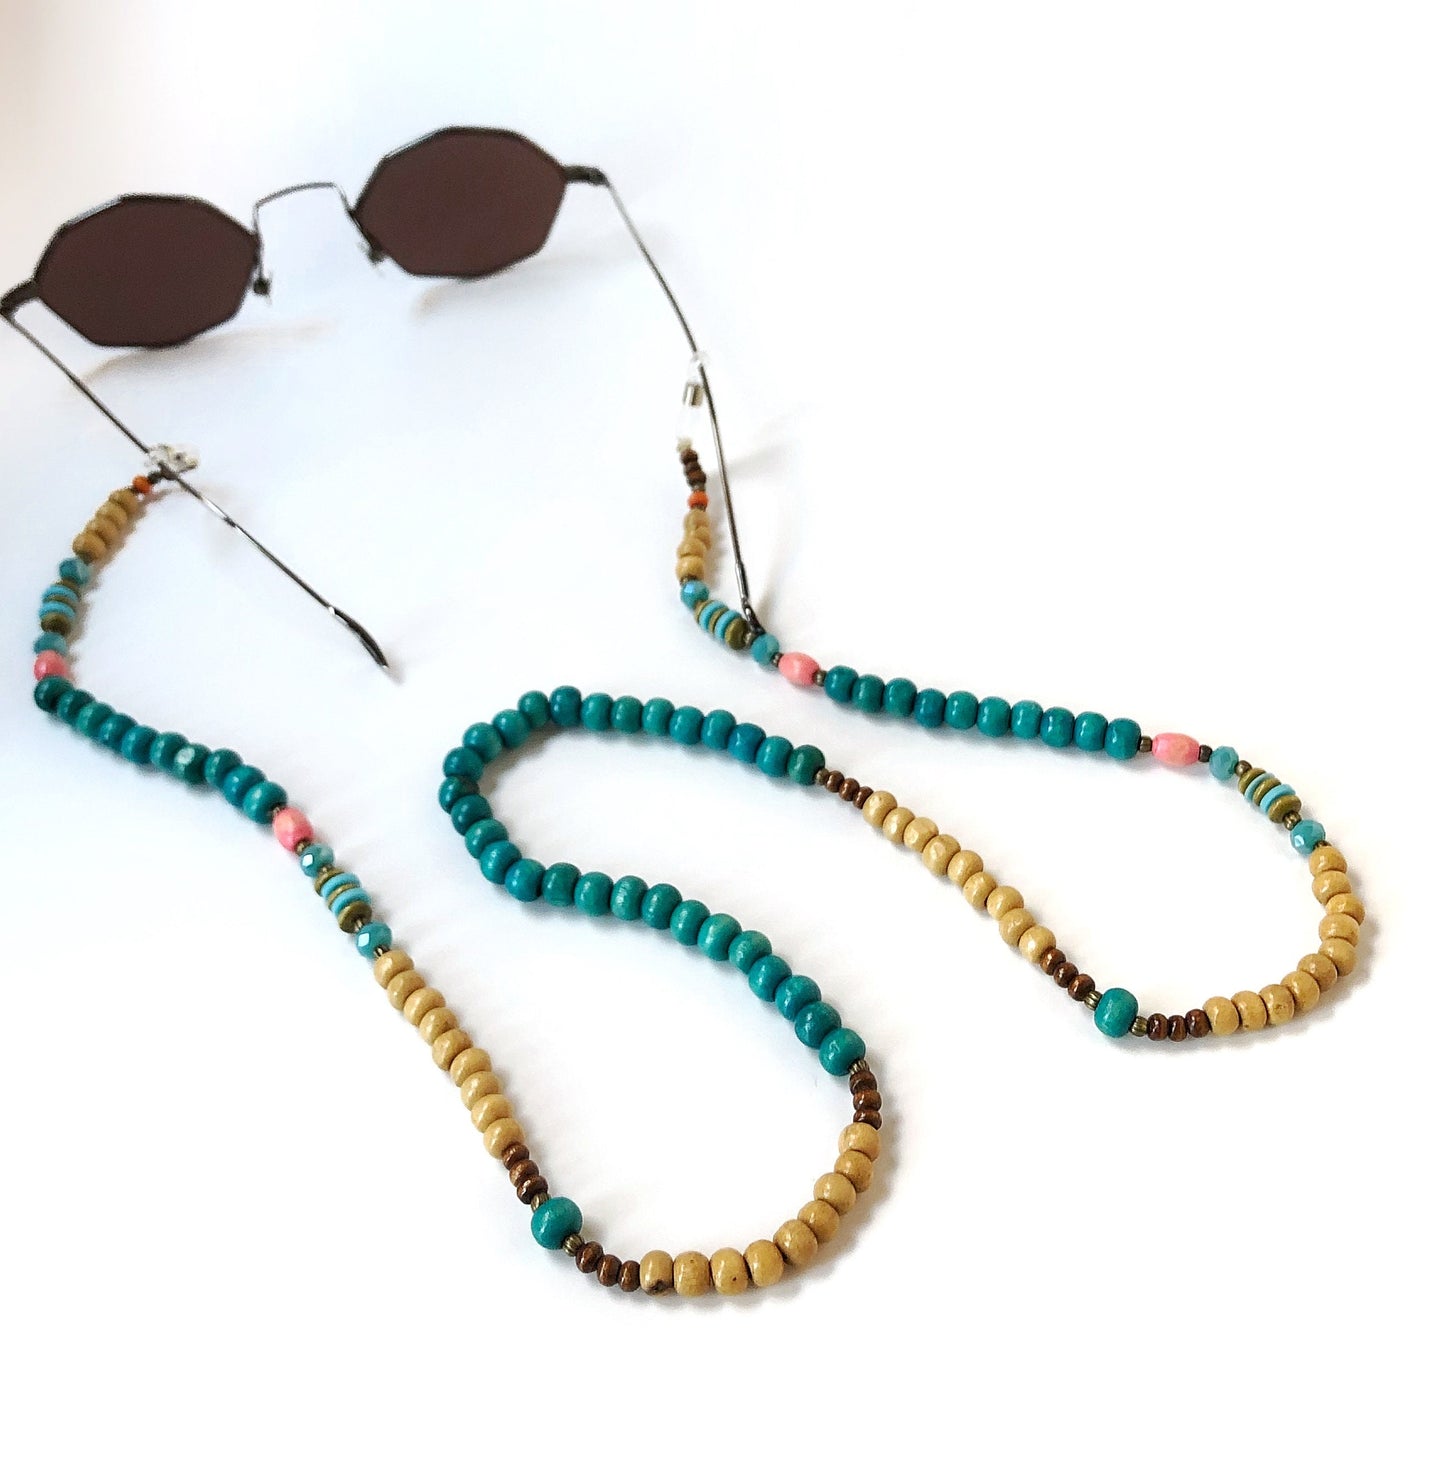 Natural Wooden Beaded Glasses Chain,Sunglasses Cord, Eye Glass Holder,Hip Multicolour Mask Chain,Unisex Beach Eye Wear Lanyards,Unique Gifts